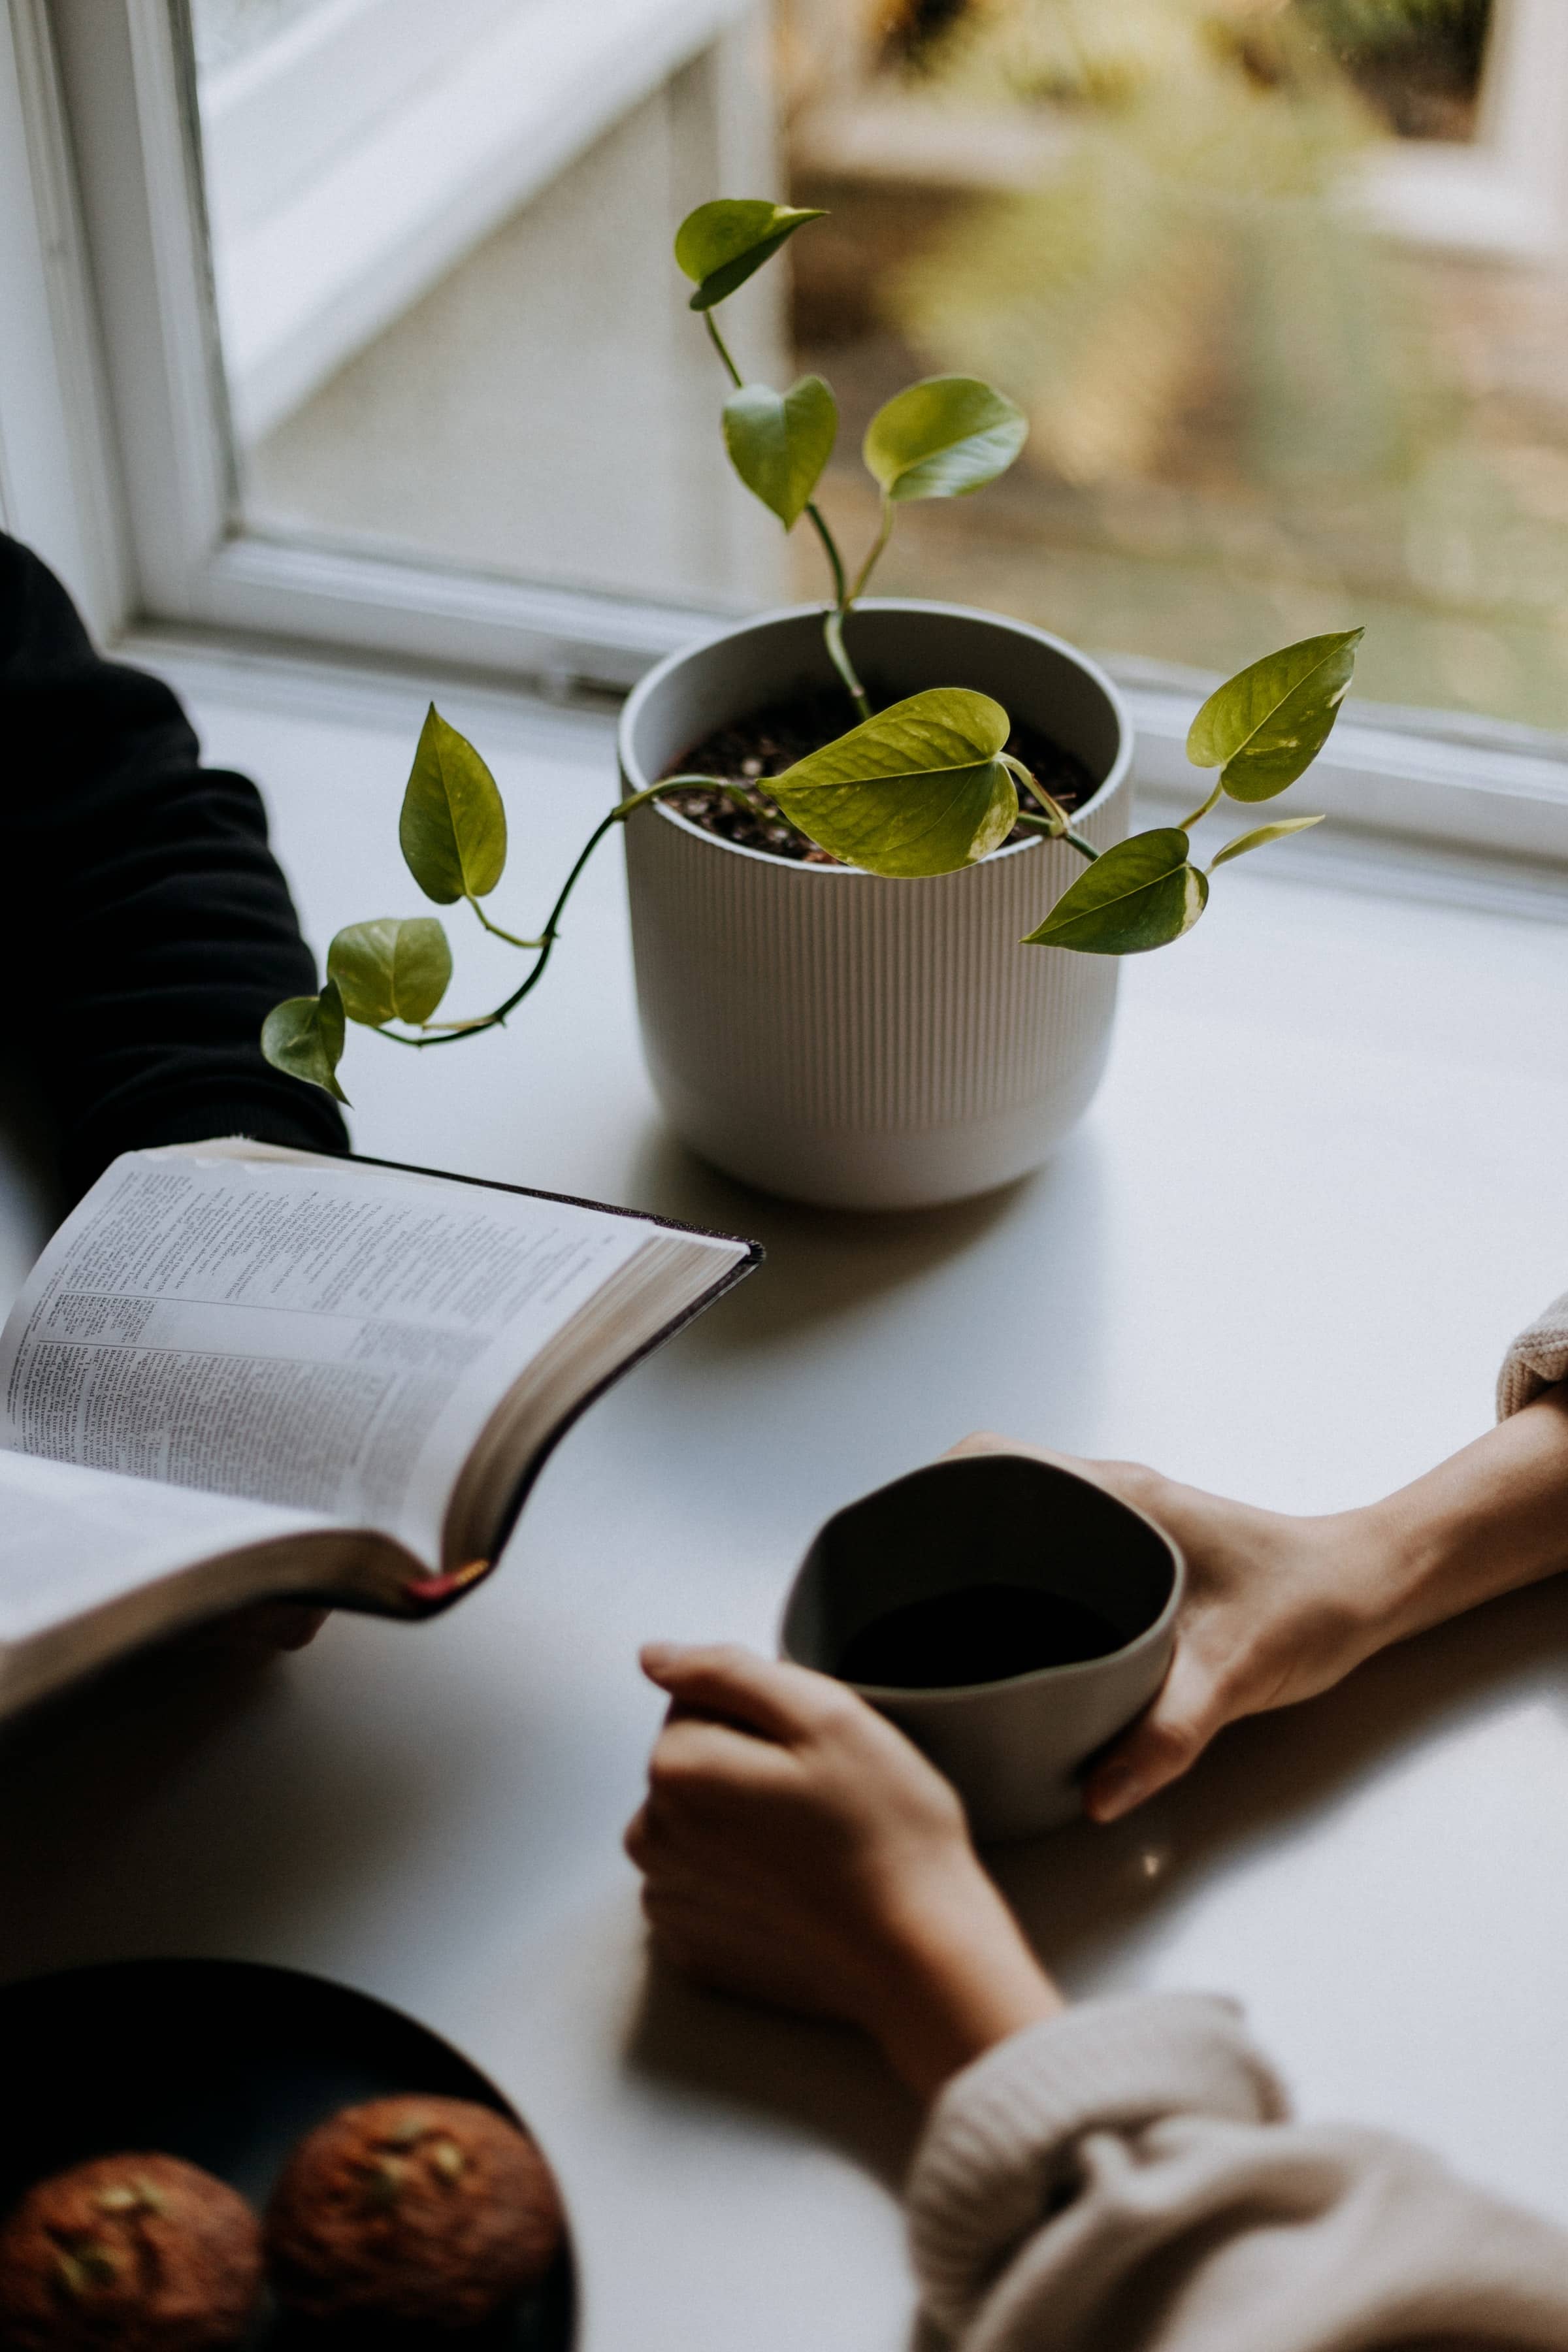 A table with a small plant and two people. One person is reading, the other is drinking coffee.